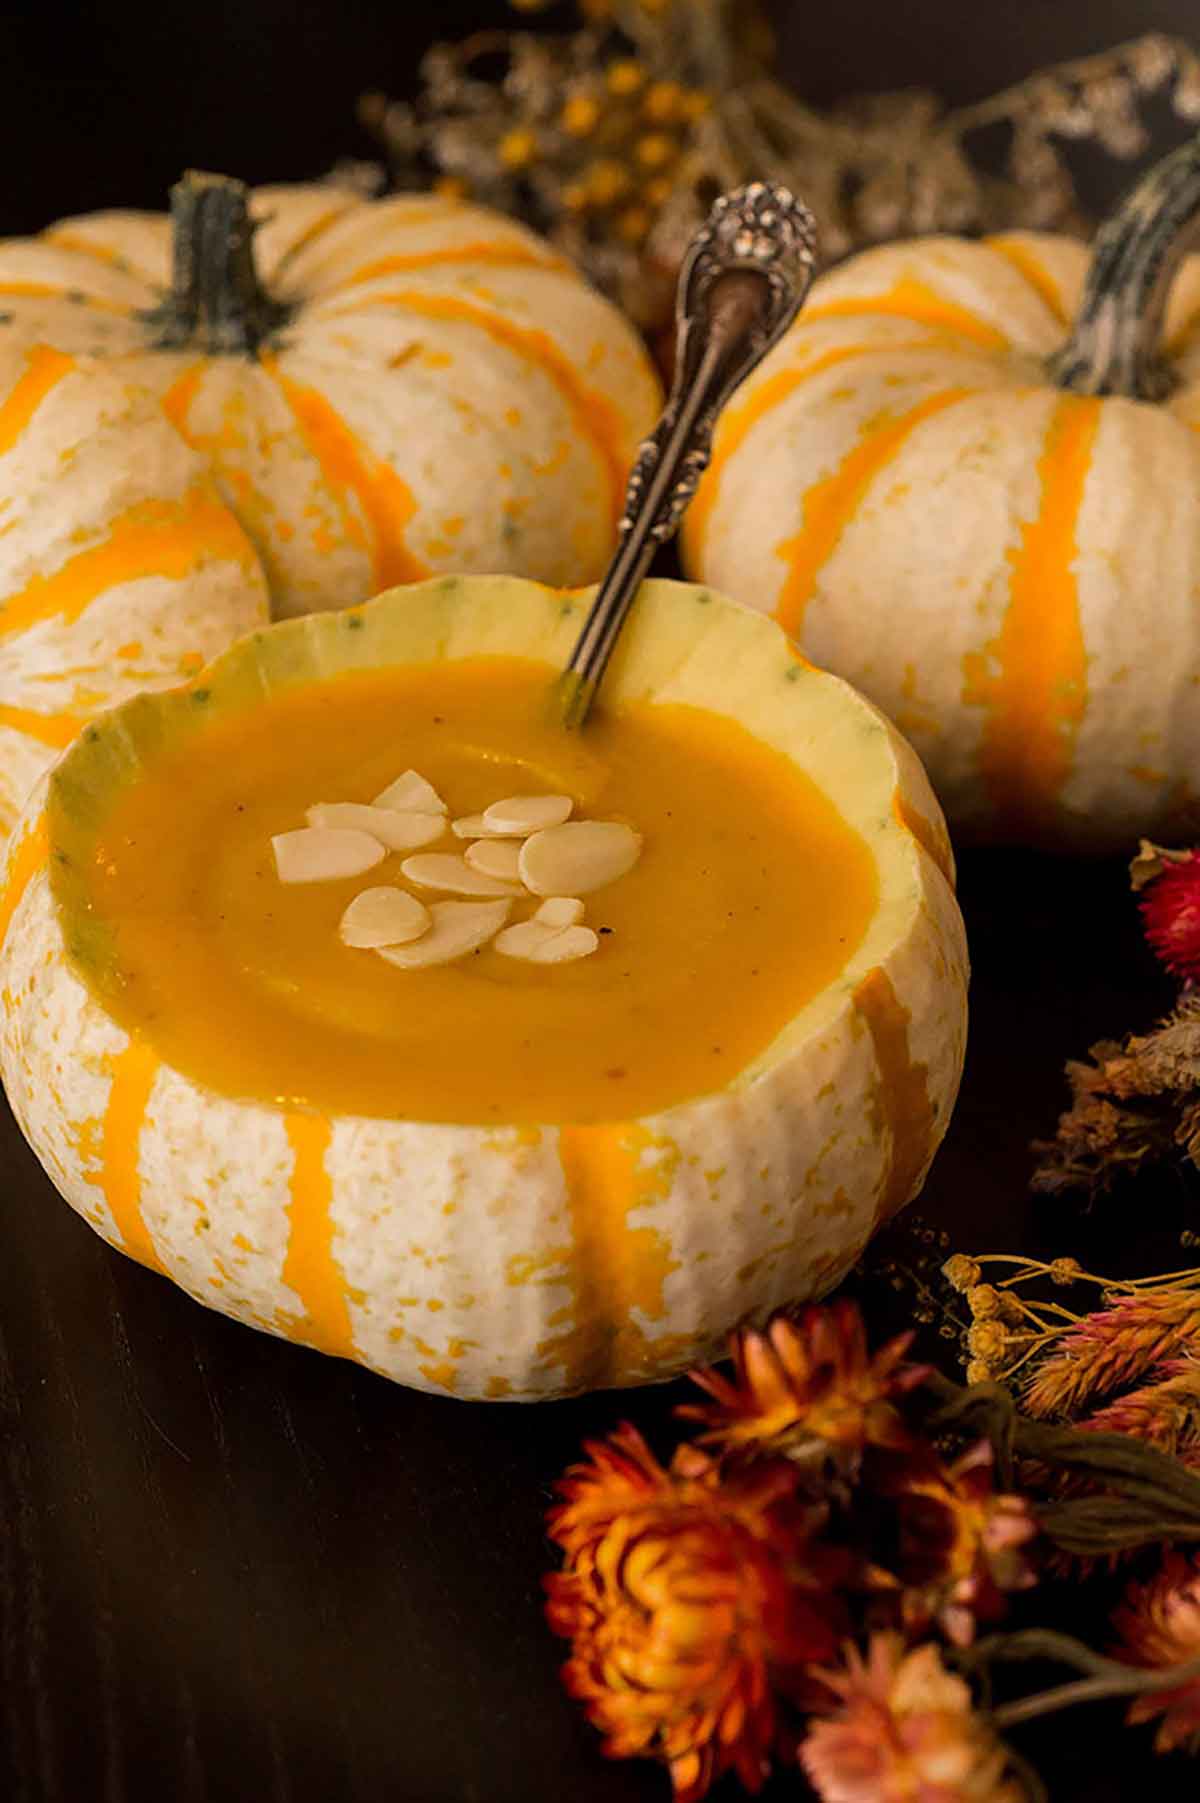 A pumpkin gourd full of soup, garnished with almonds, surrounded by dry flowers and more pumpkin gourds on a black table.